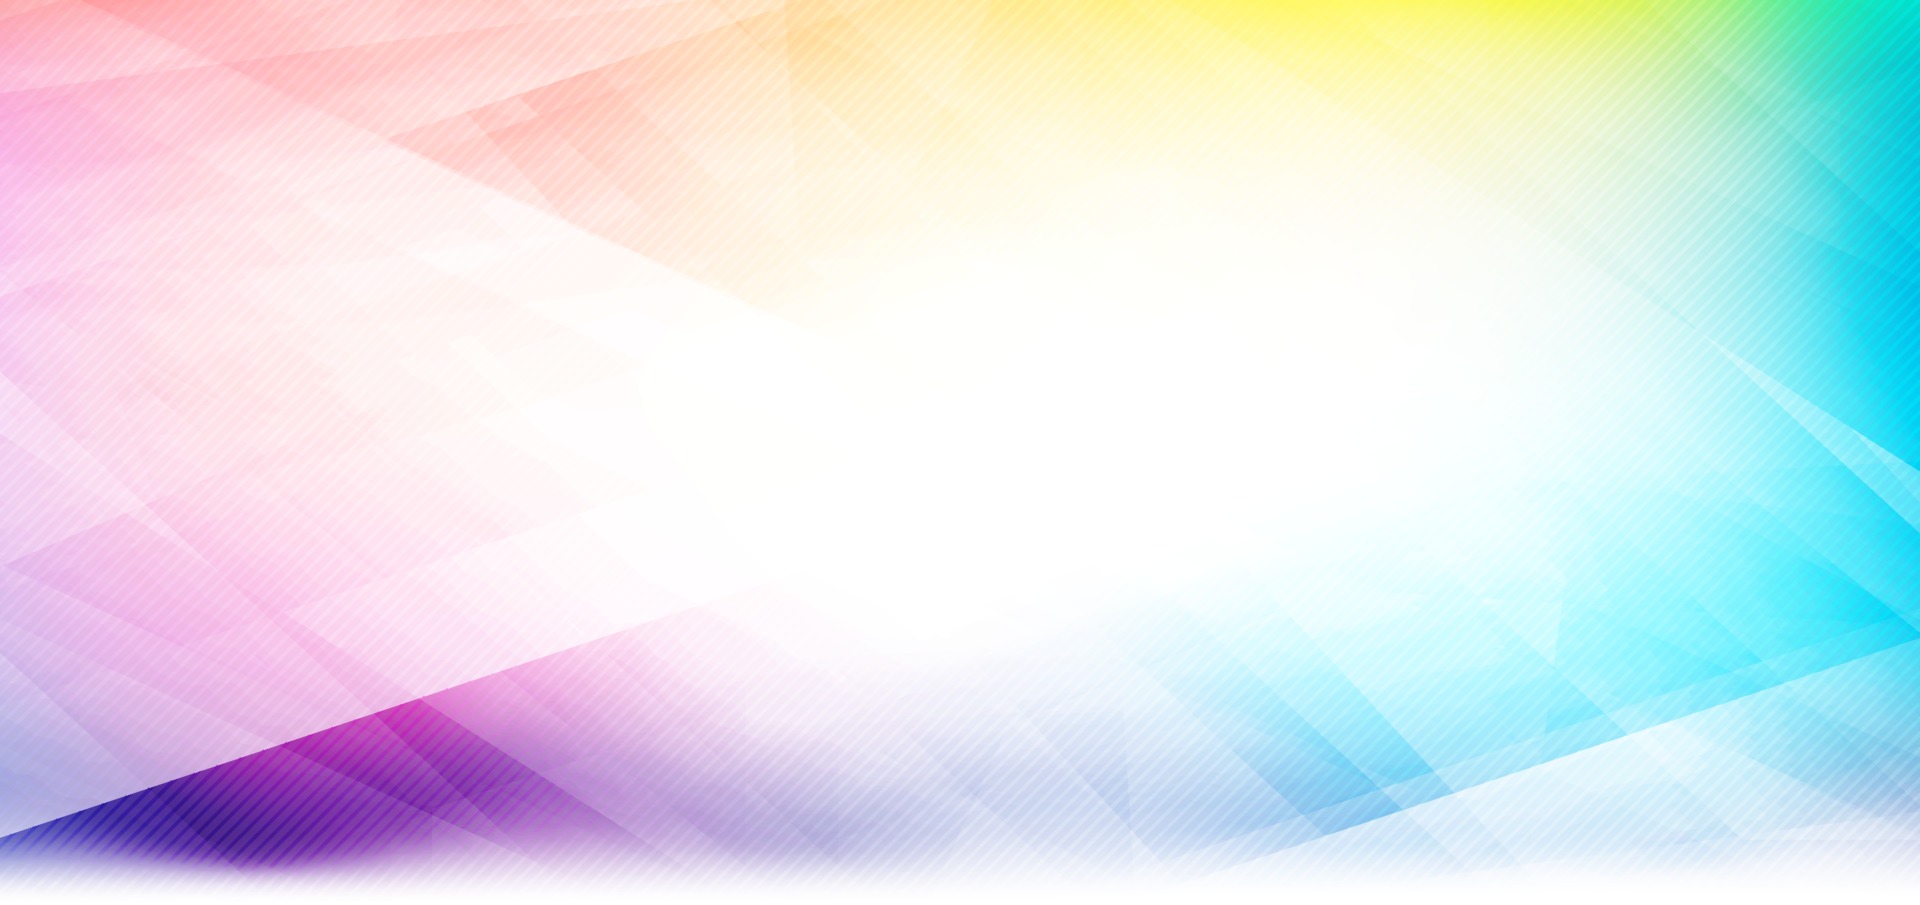 Abstract background design Royalty Free Vector Image